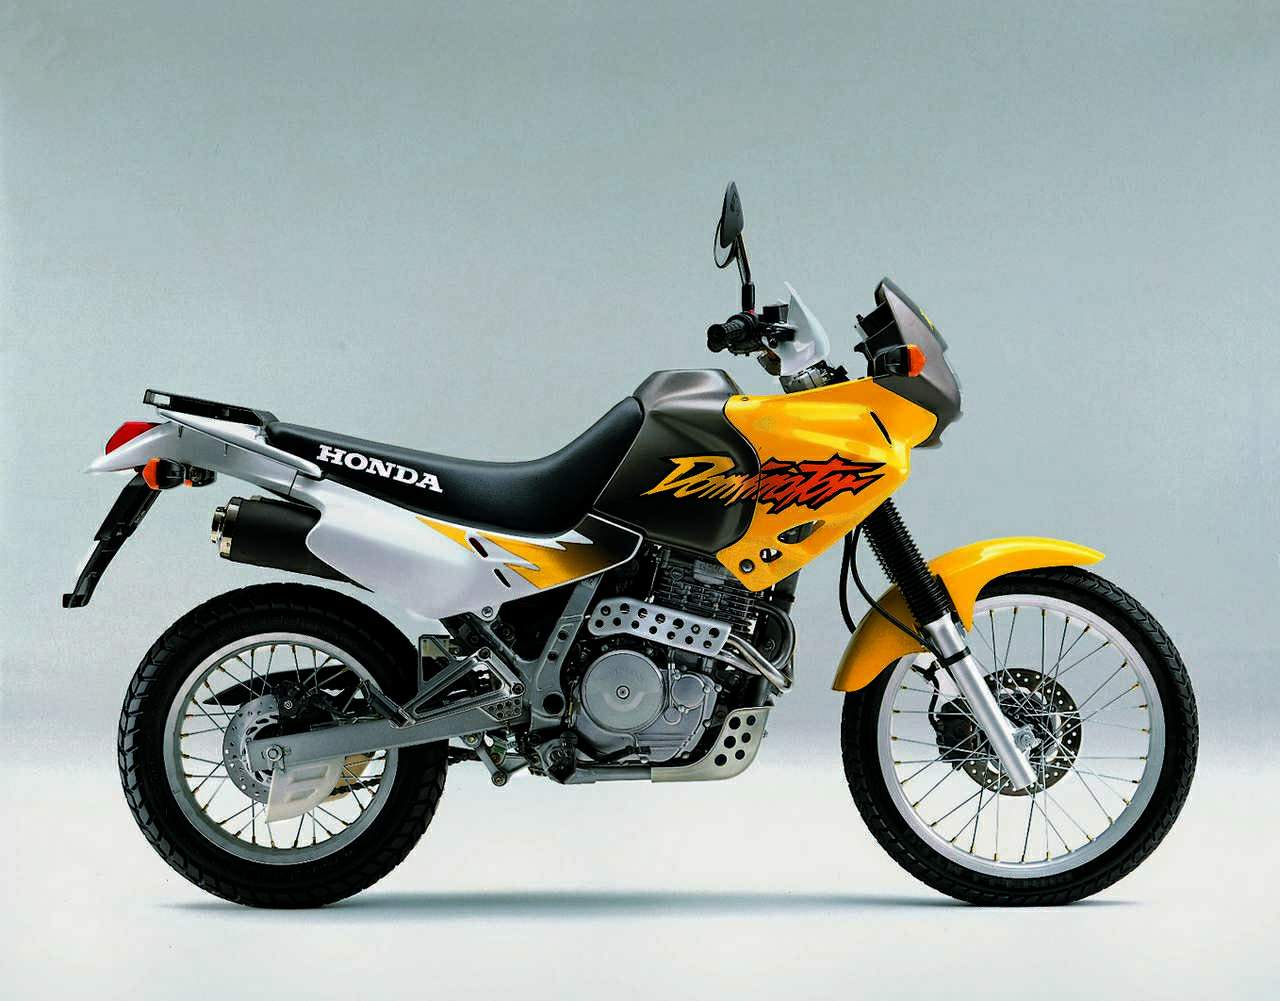 Honda NX 650 Dominator For Sale Specifications, Price and Images